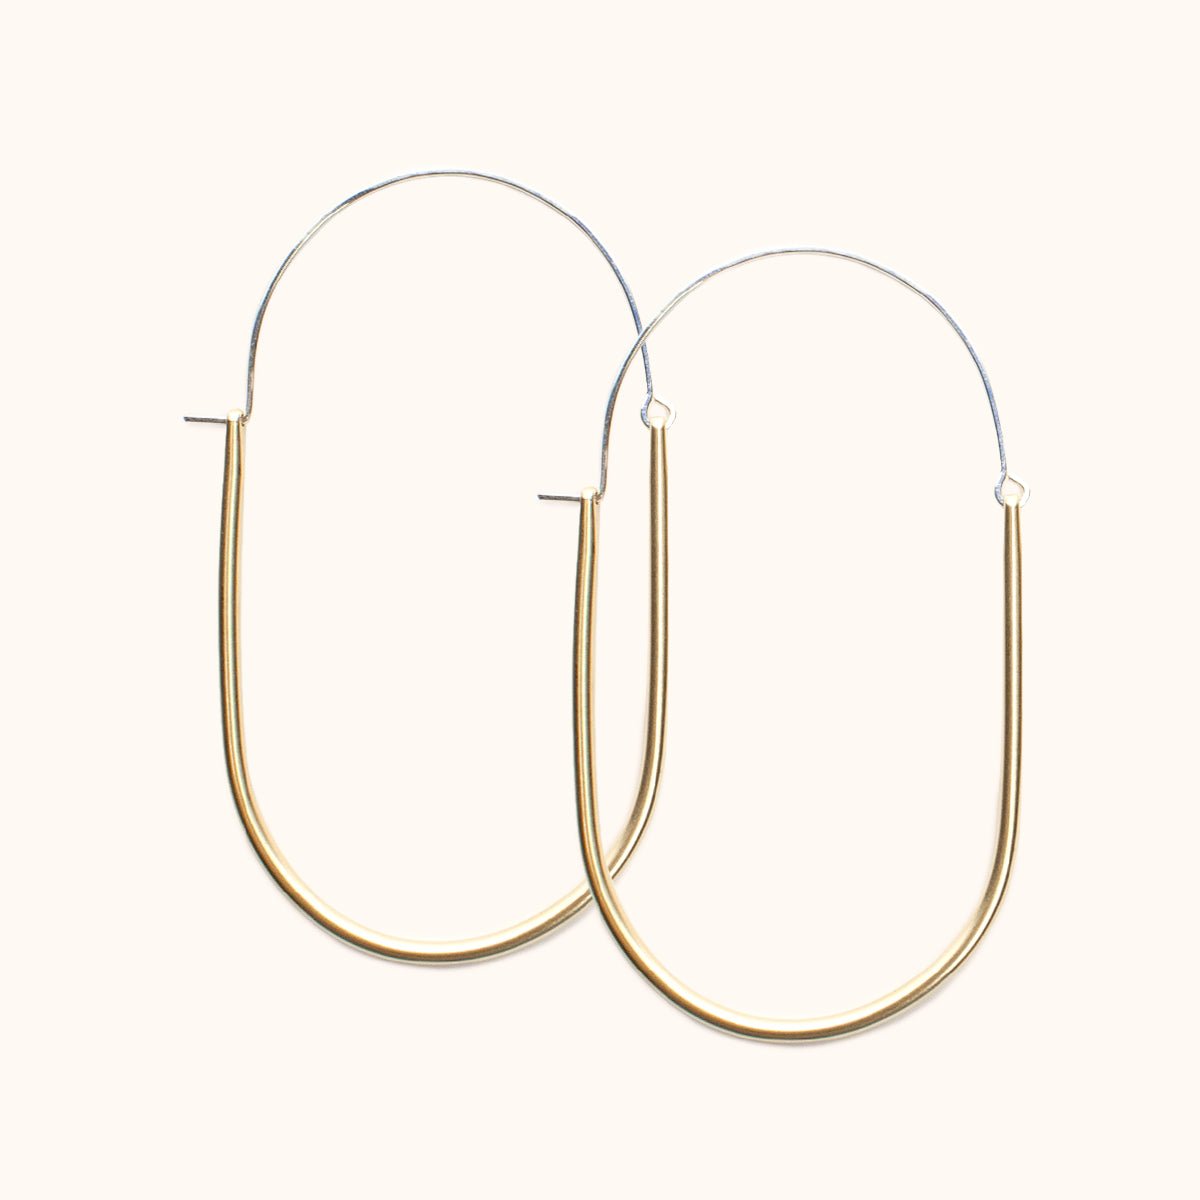  A large sterling silver and brass U-shaped earring with an arched ear wire that meets the top of the U. Designed and handcrafted in Portland, Oregon.